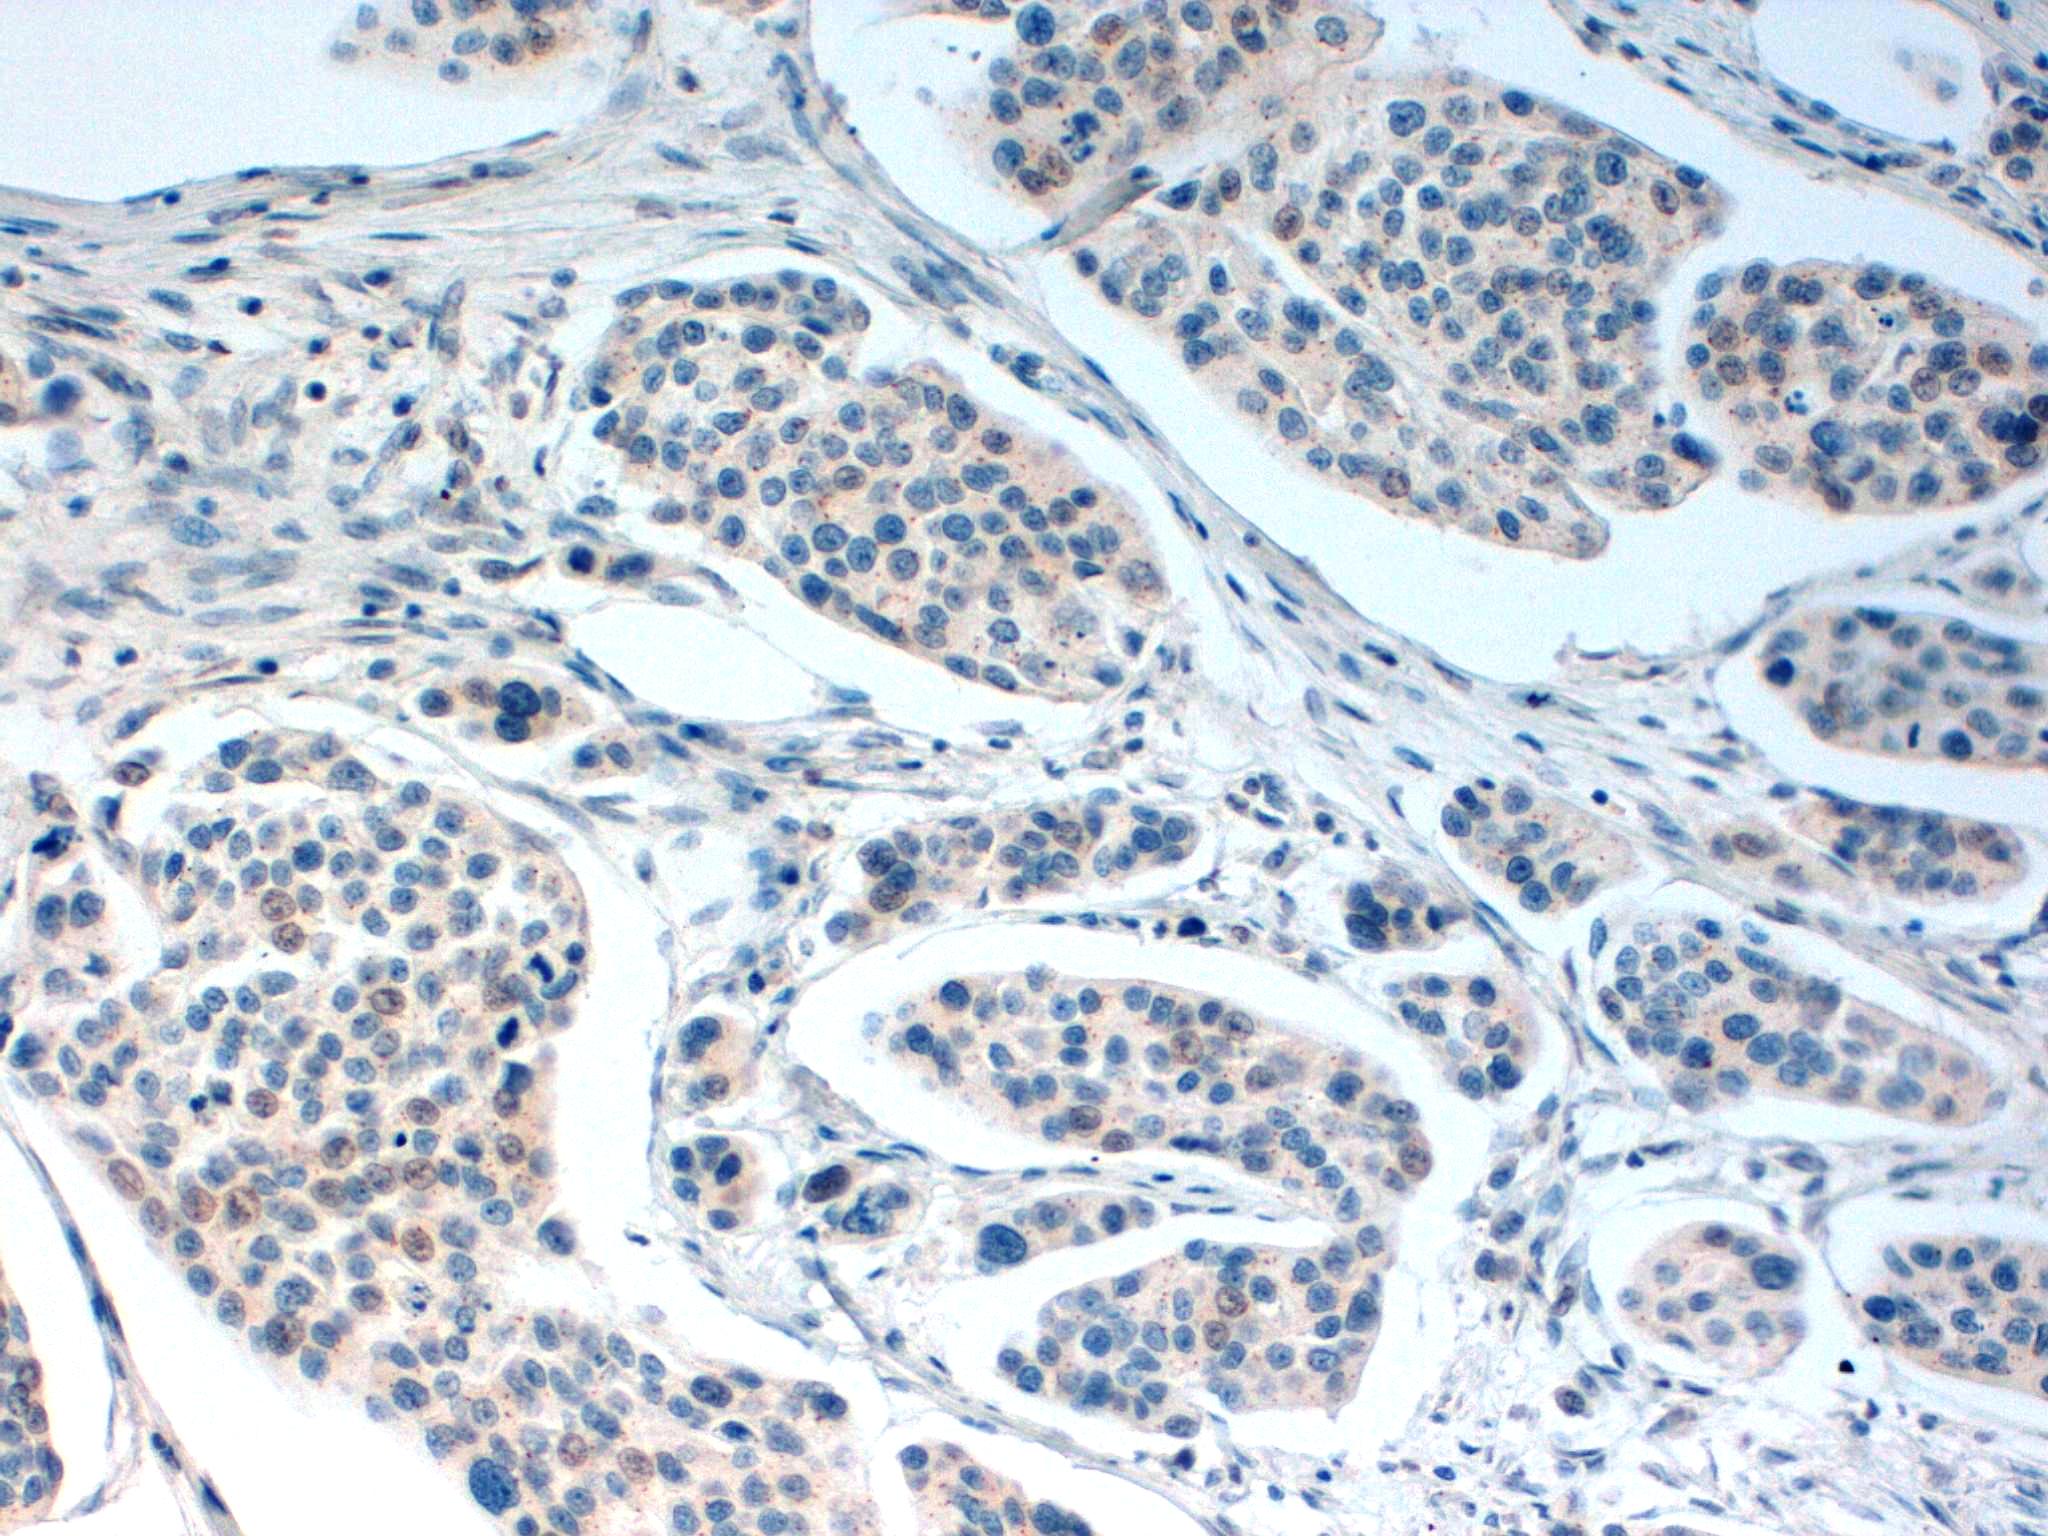 Immunohistochemical staining of FFPE human bladder tissue using Histone H2A.x antibody at 5 µg/ml and antigen retrieval at pH 6.2.  Visualization using goat anti-rabbit HRP secondary antibody and DAB substrate.  Pathologists Comments: Excellent nuclear staining on bladder.  pH 9.5 staining shows better nuclear staining of the neoplastic cells.